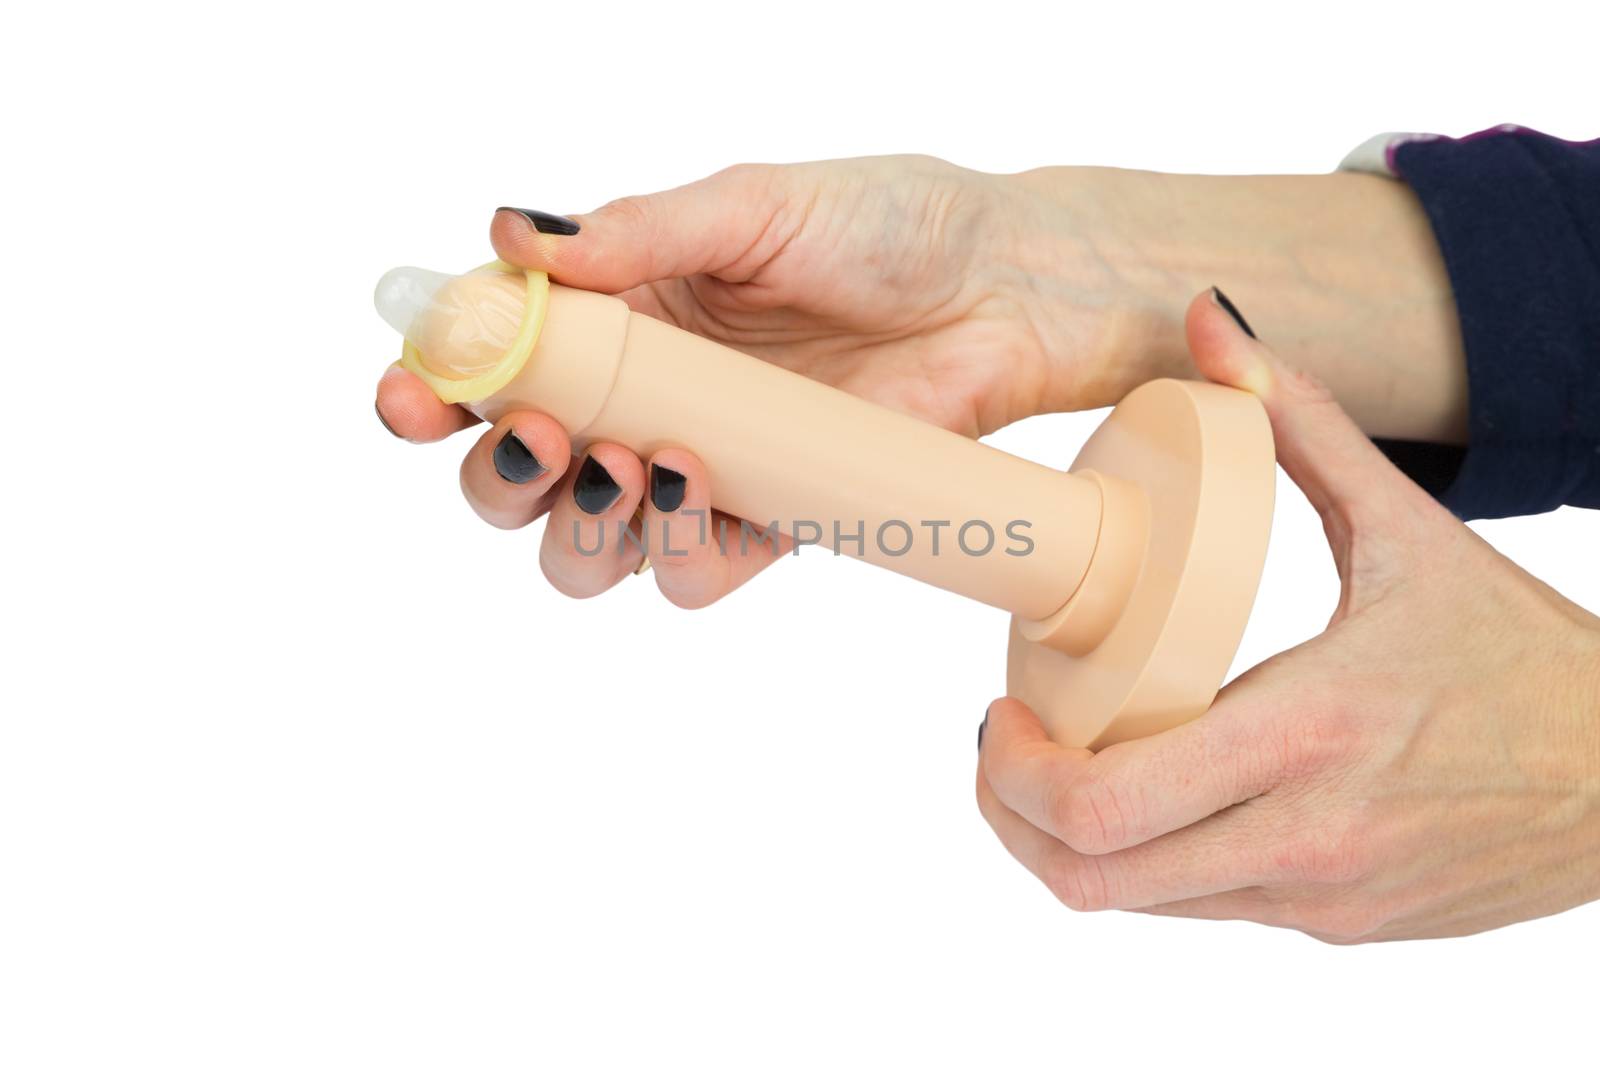 Female hands unrolling condom on plastic penis model  by BenSchonewille